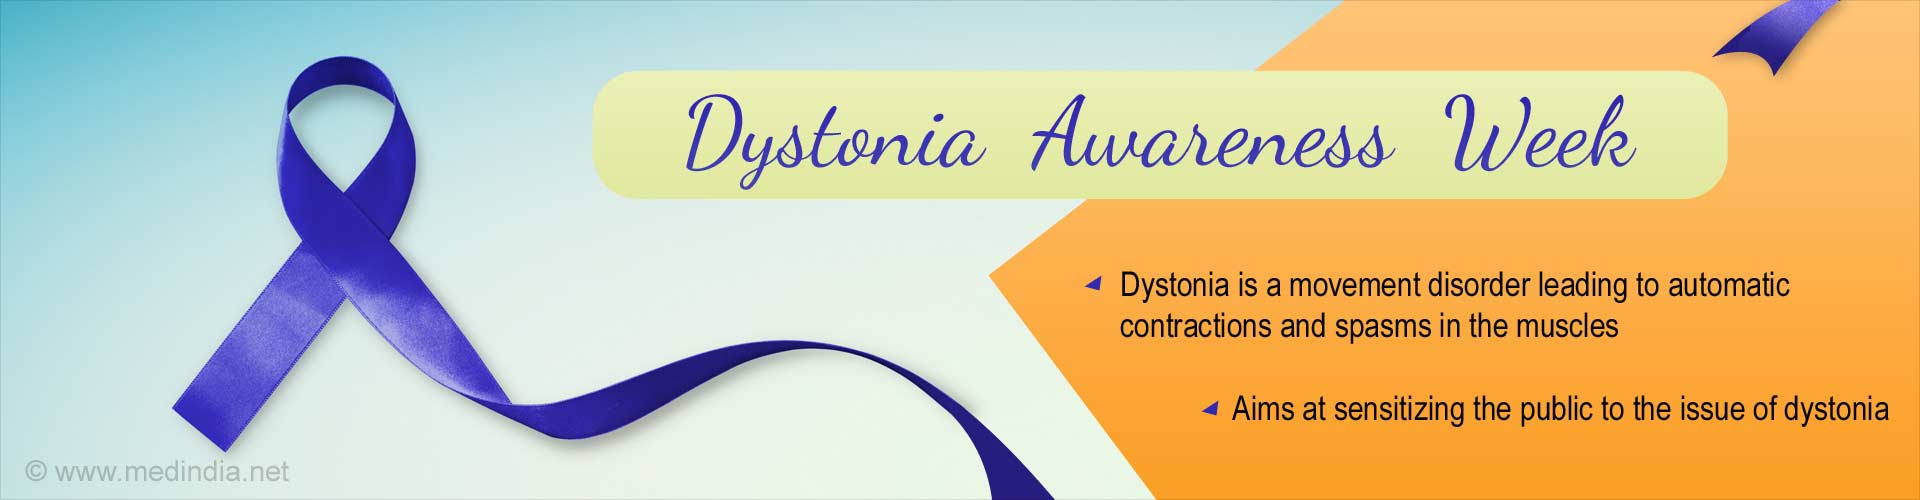 dystonia awareness week
- dystonia is a movement disorder leading to automatic contractions and spasms in the muscles
- aims at sensitizing the public to the issue of dystonia
